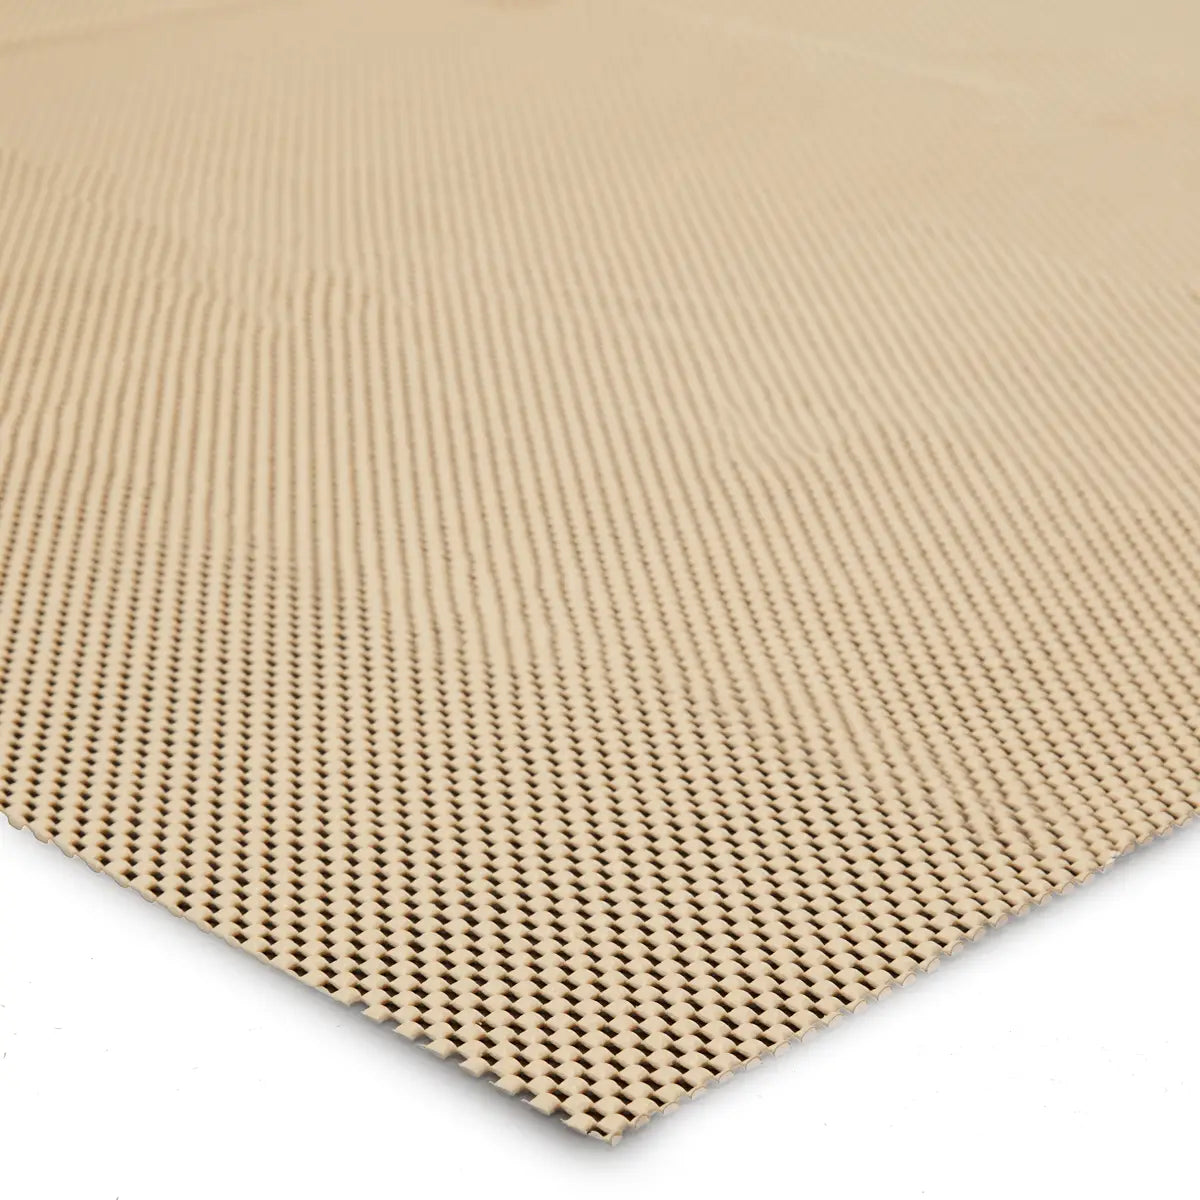 Designed specifically for outdoor use, the outdoor rug pad allows air to move under the rug to prevent mold growth. This low-profile pad extends the life of your outdoor rug while providing support and structure with durable polyester material. Amethyst Home provides interior design services, furniture, rugs, and lighting in the Omaha metro area.